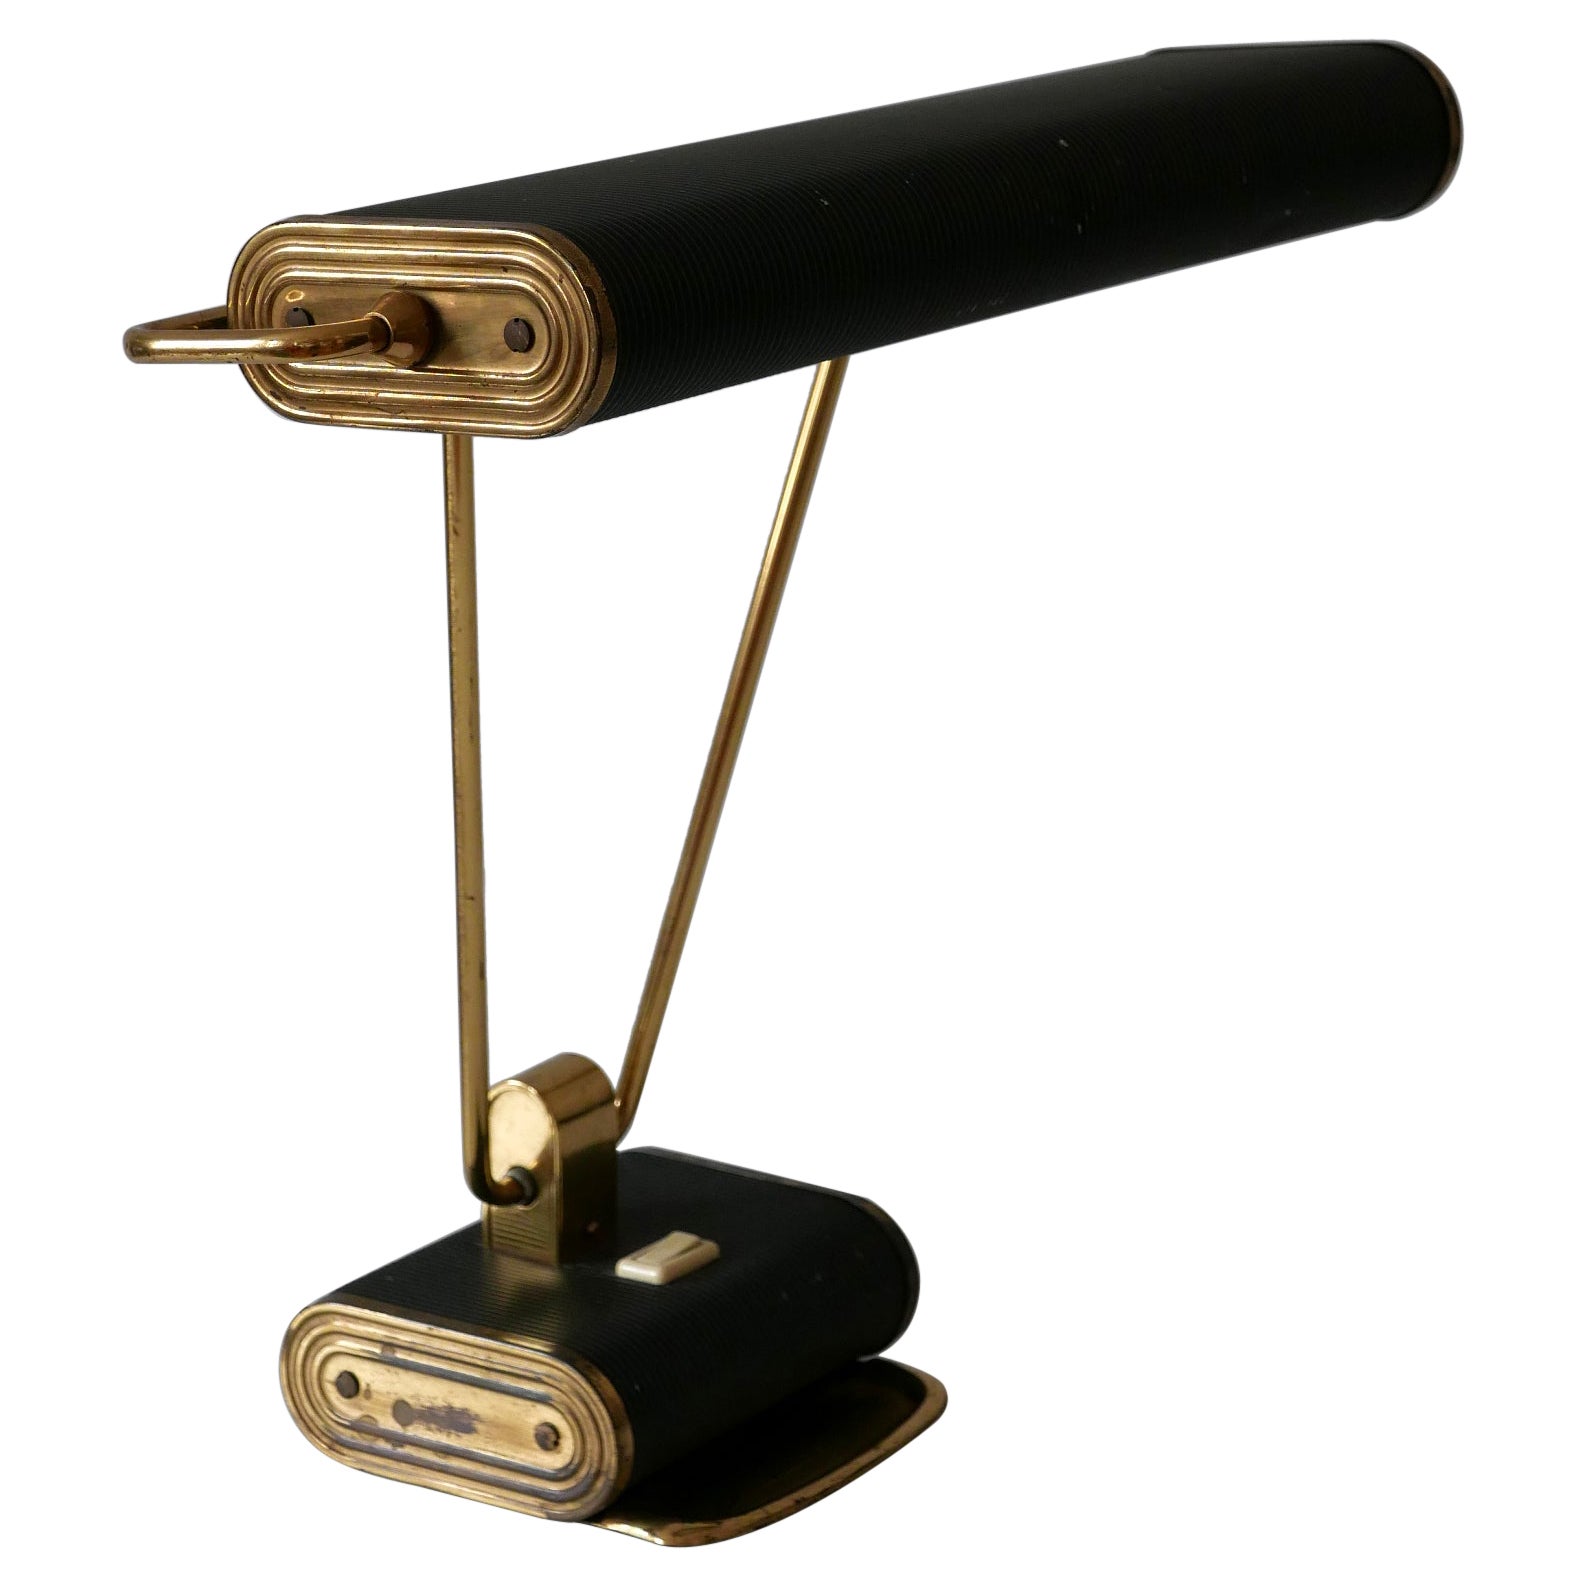 Art Deco Table Lamp or Desk Light 'No 71' by André Mounique for Jumo 1930s For Sale